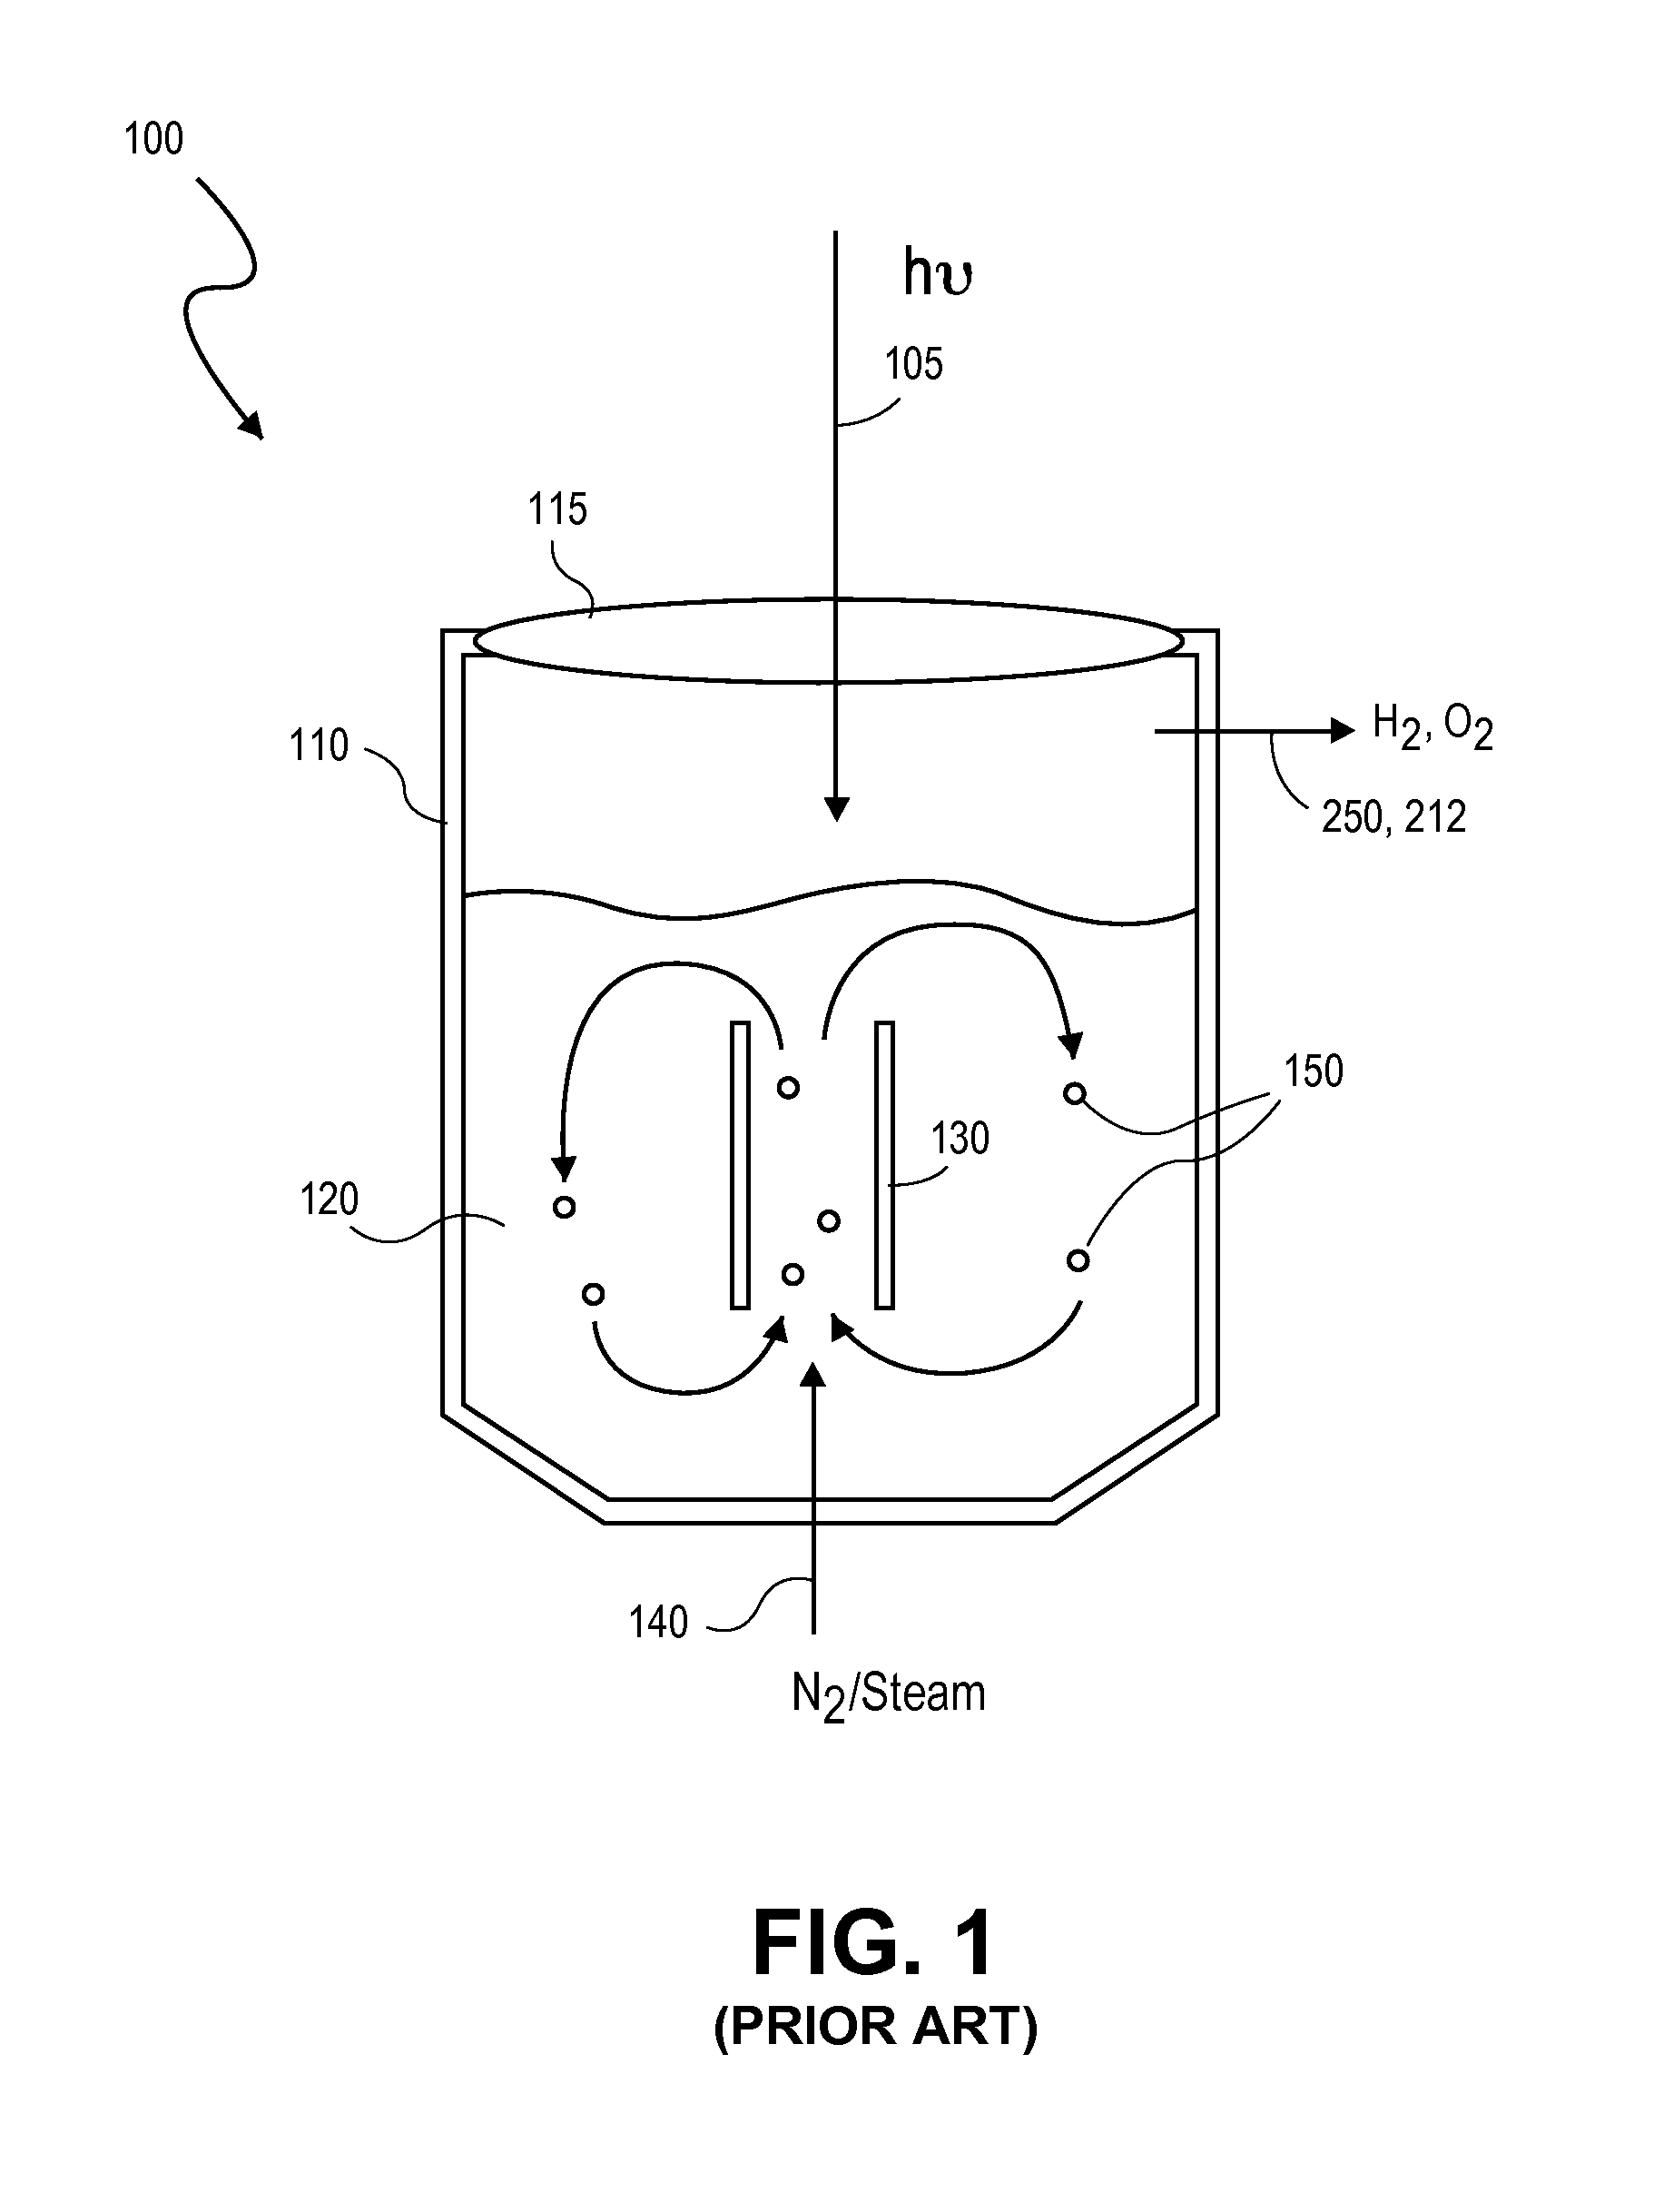 Moving bed reactor for solar thermochemical fuel production